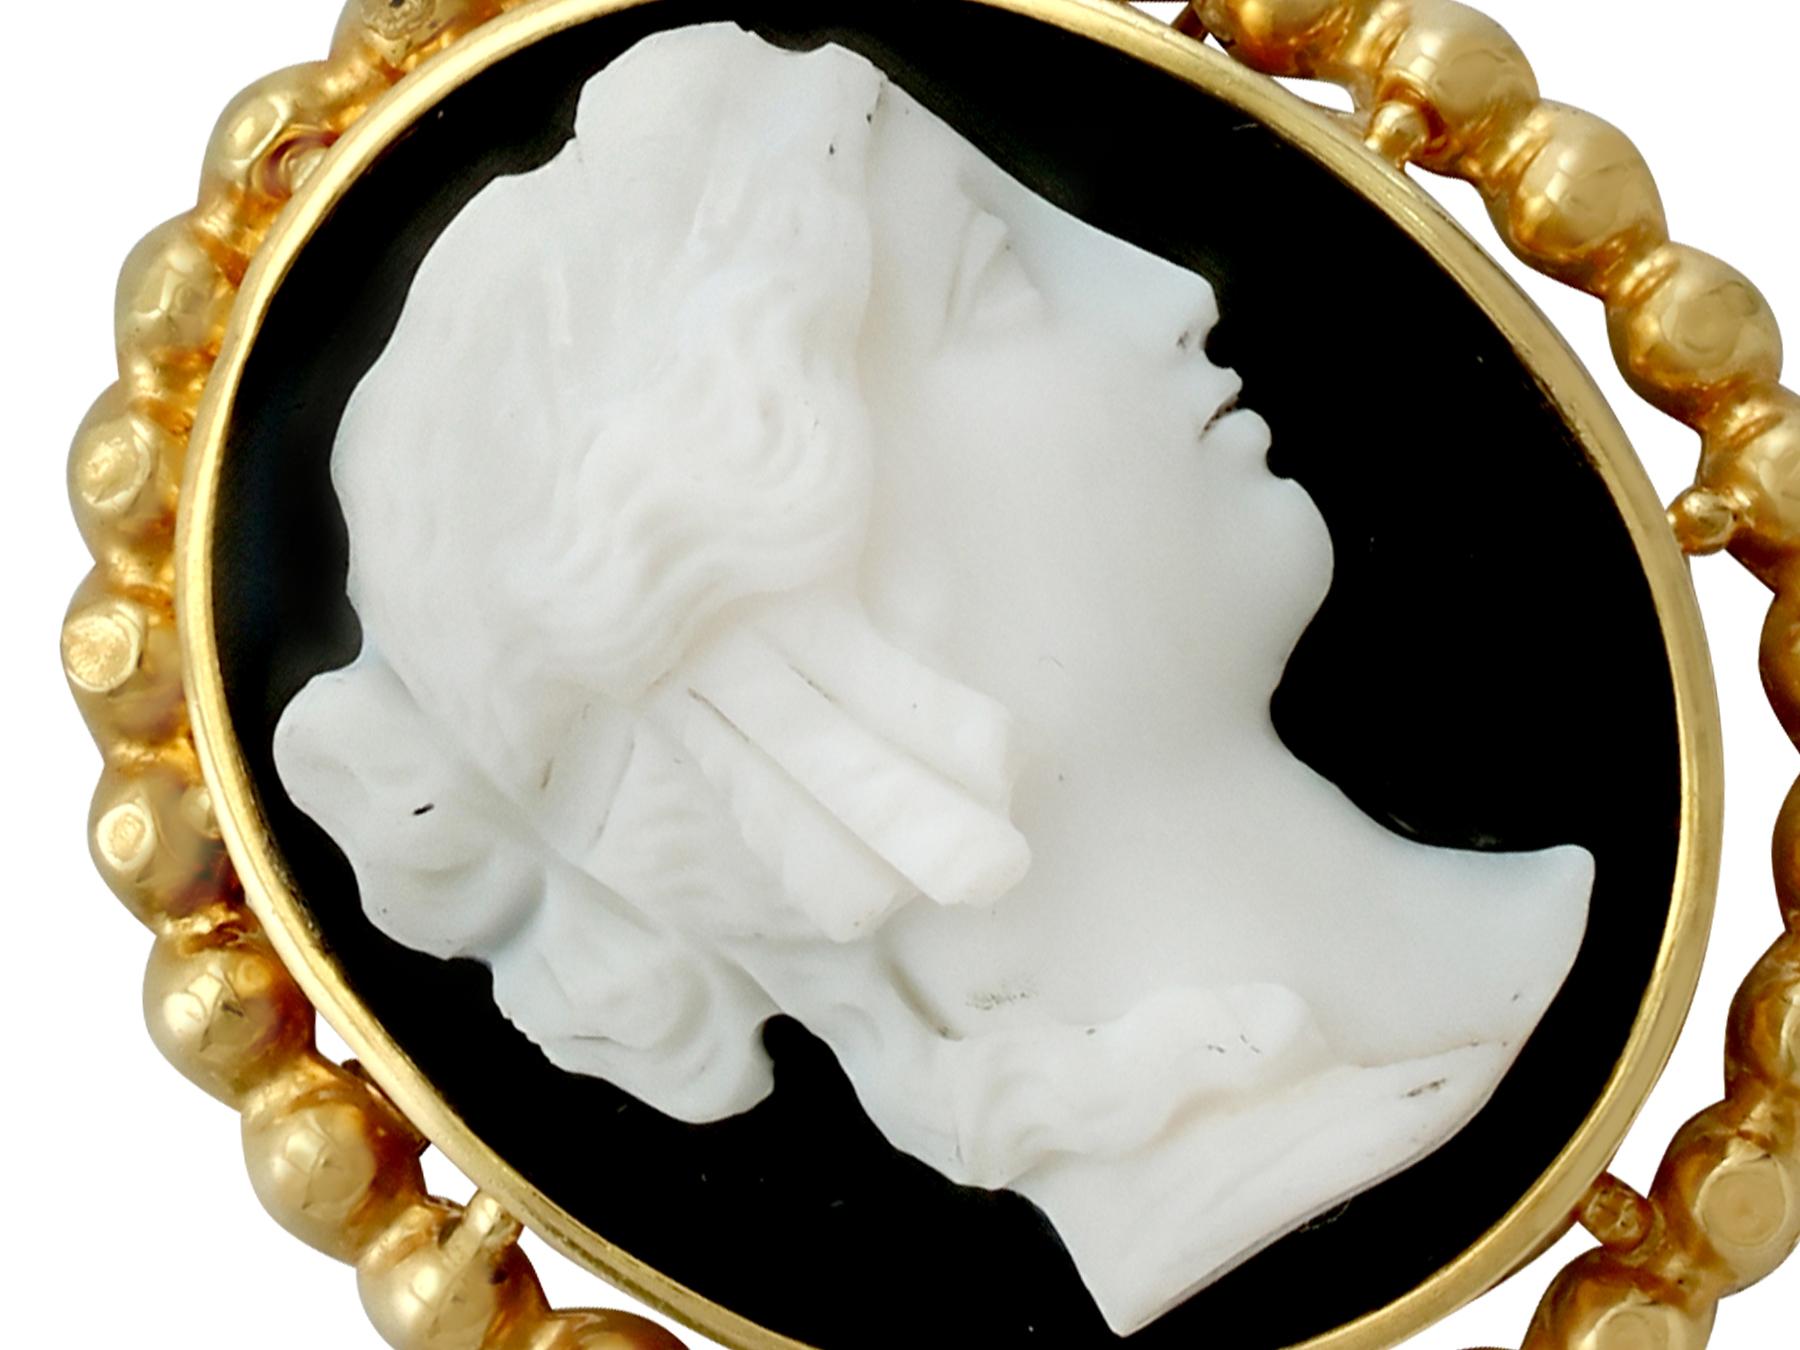 A fine and impressive antique French 18 karat yellow gold cameo brooch / pendant; part of our antique jewelry and estate jewelry collections.

This fine antique French cameo brooch / pendant has been crafted in 18k yellow gold.

The oval cameo is